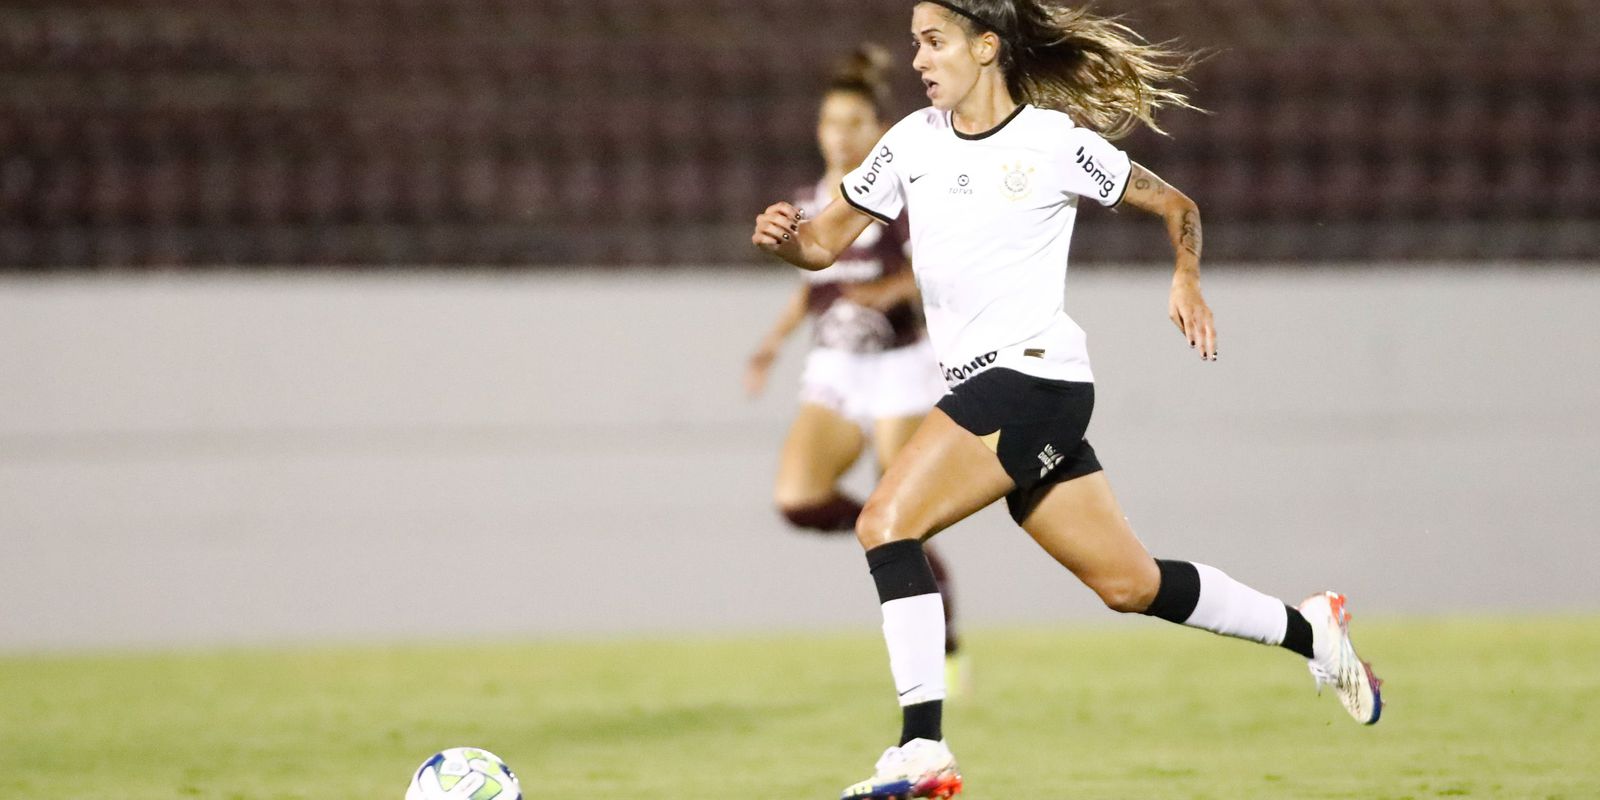 Corinthians beats Ferroviária and takes the lead in the Brazilian Women's Championship